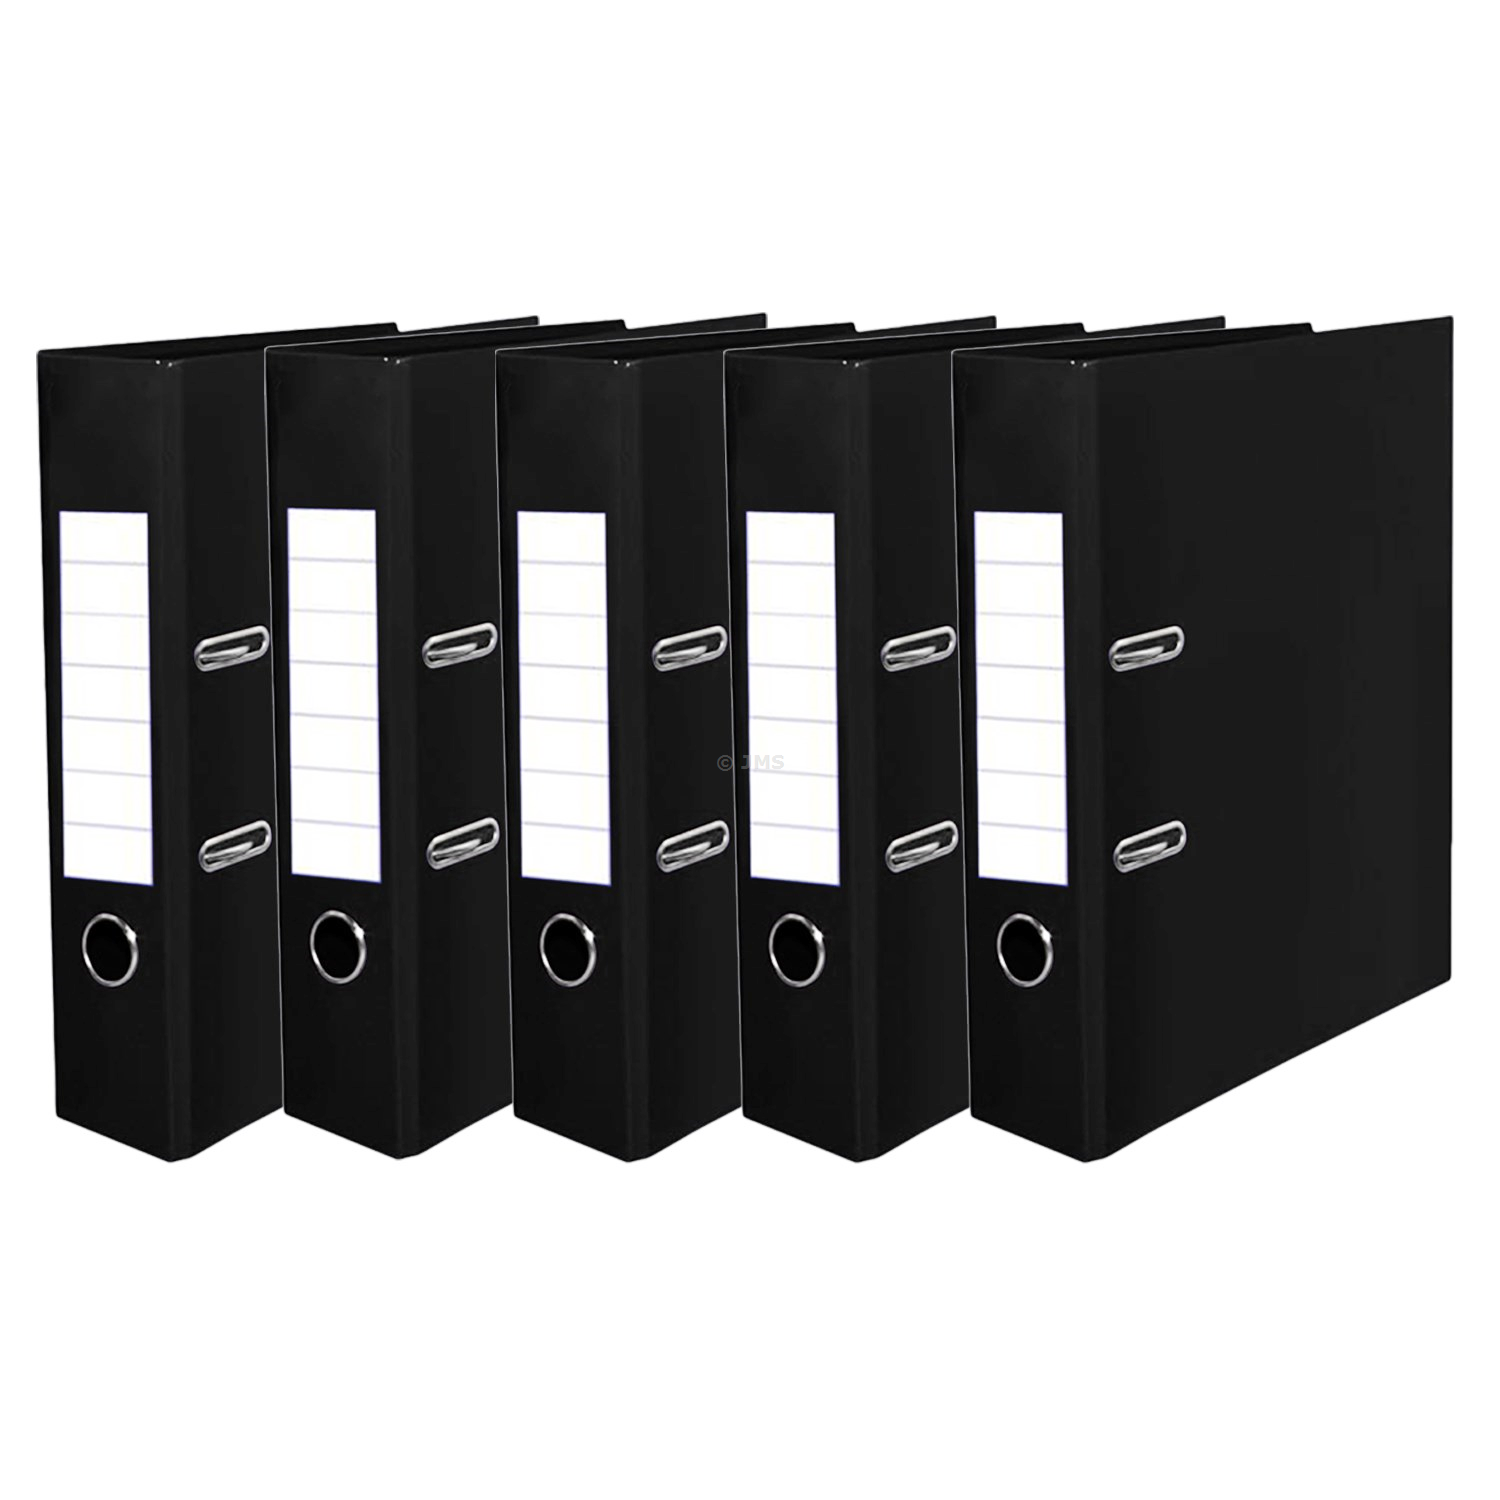 Pack of 5, Black A4 Large 75mm Lever Arch Files Binder Folders Metal Edge & Finger Pull Spine Stationery Document Organisation Storage Paper for Office School